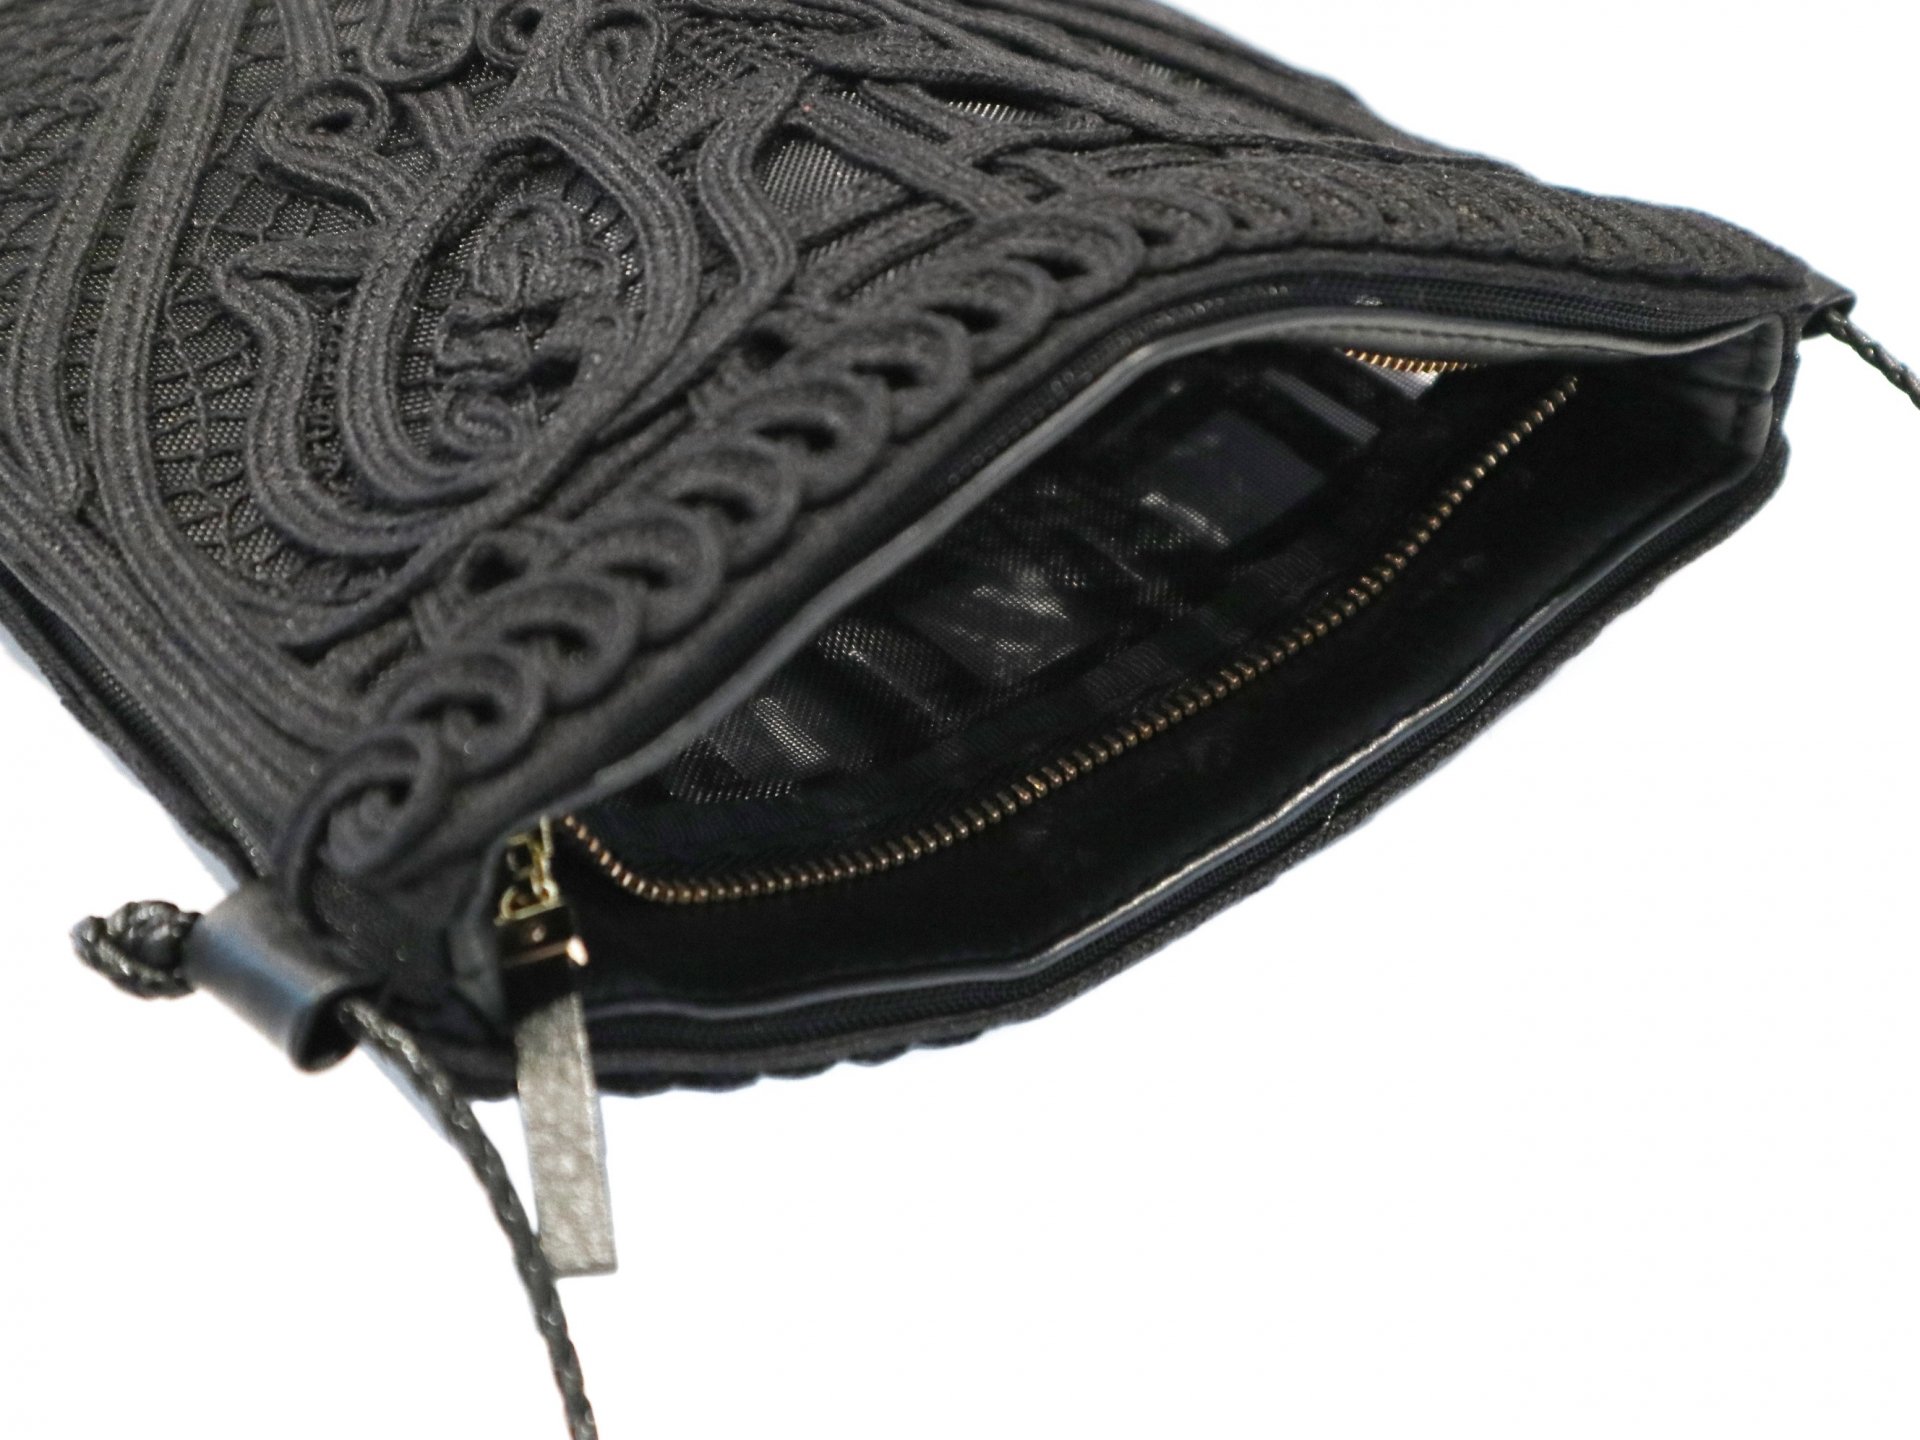 Cording Embroidery Pouch With Leather Strap - Revolution Web Store